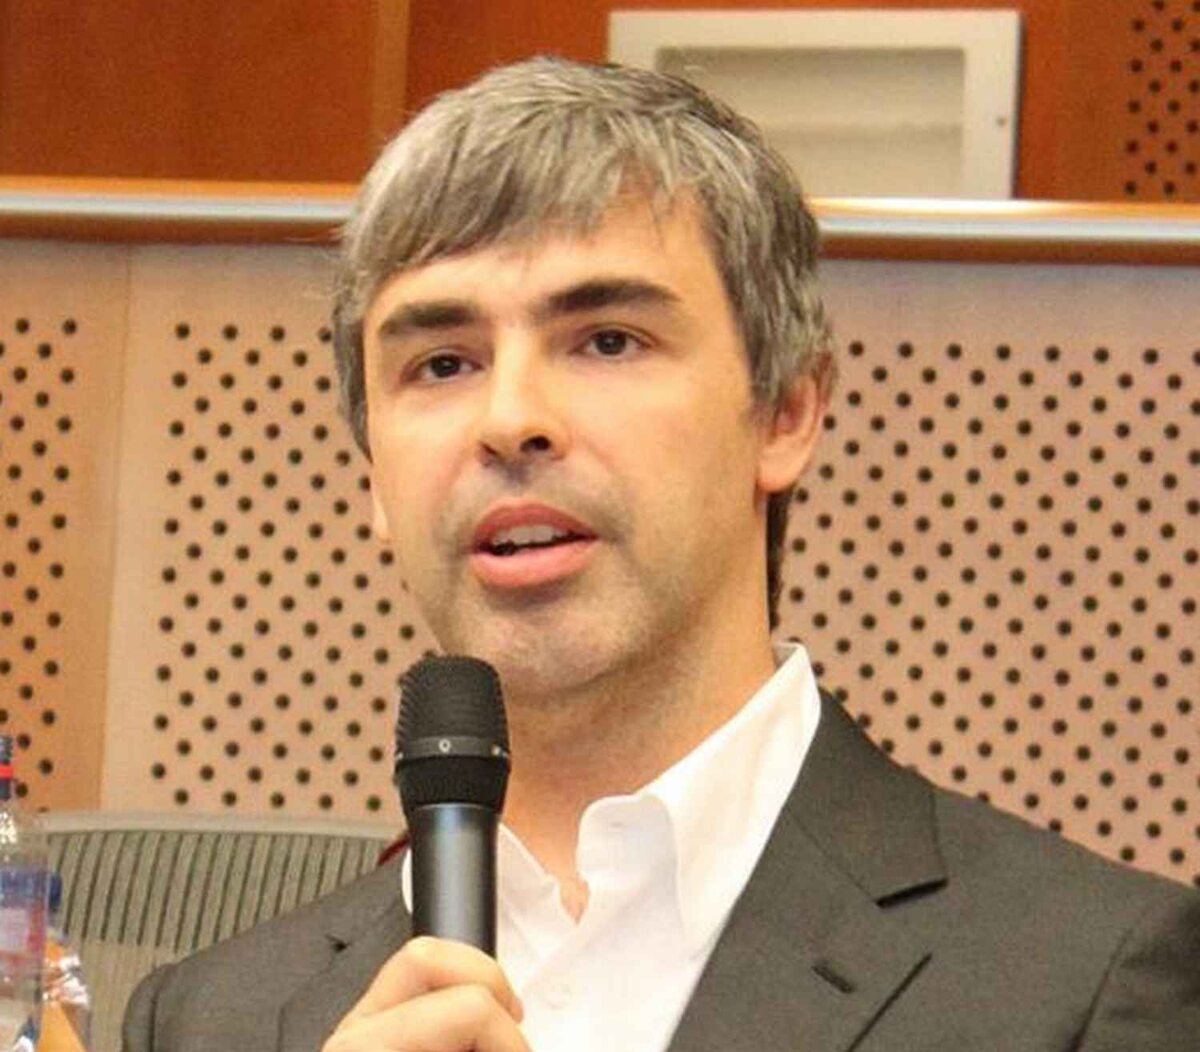 Larry Page (fot.By Stansfield PL (Wikimedia Commons) [CC BY-SA 3.0 (http://creativecommons.org/licenses/by-sa/3.0)], via Wikimedia Commons)